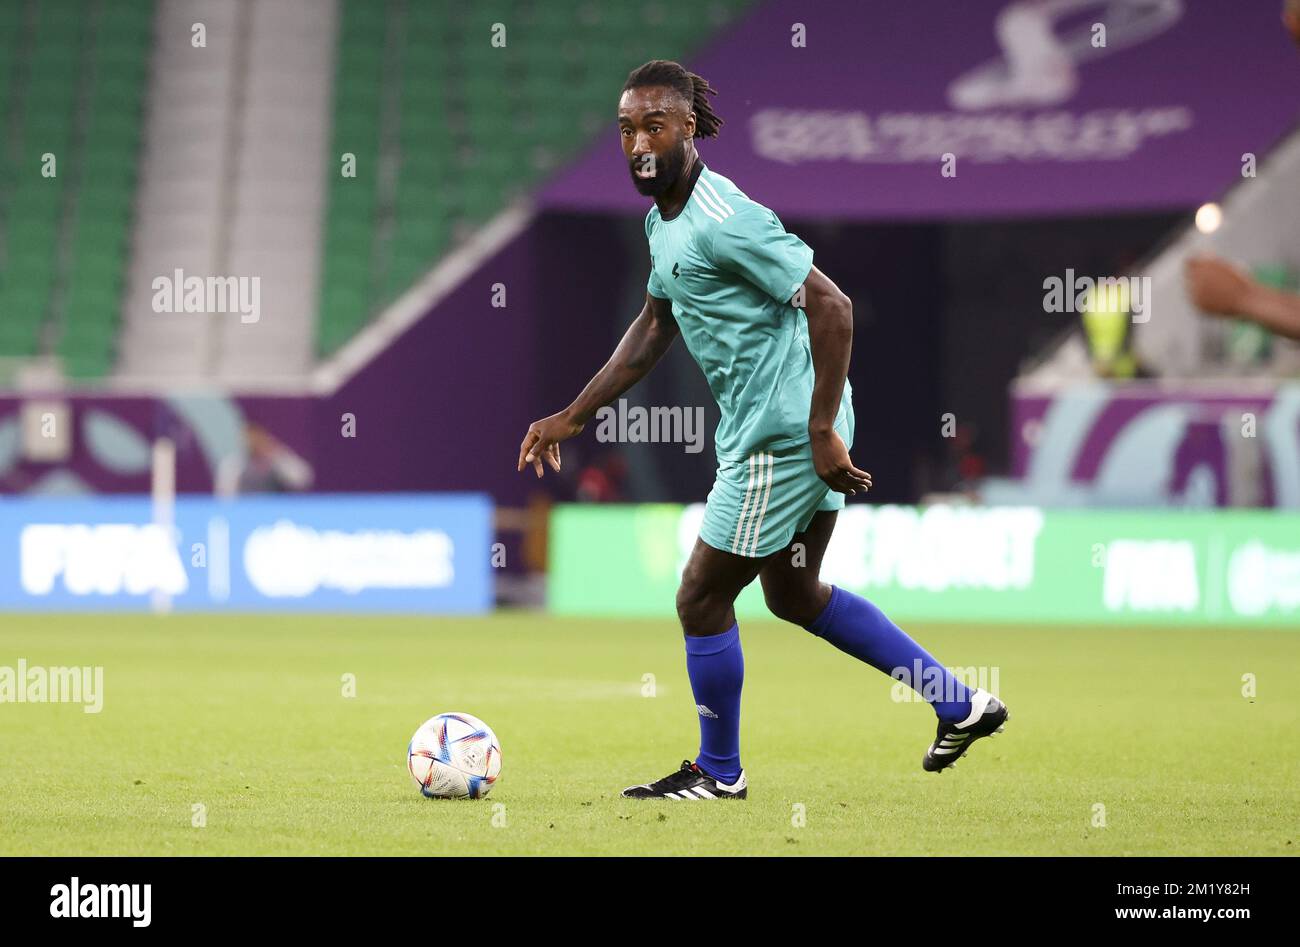 Doha, Qatar - December 12, 2022, Johan Djourou of Switzerland during a football match gathering FIFA legends and workers who built the stadiums to benefit the charity 'Football unites the World' at Al Thumama Stadium during the FIFA World Cup 2022 on December 12, 2022 in Doha, Qatar - Photo: Jean Catuffe/DPPI/LiveMedia Stock Photo